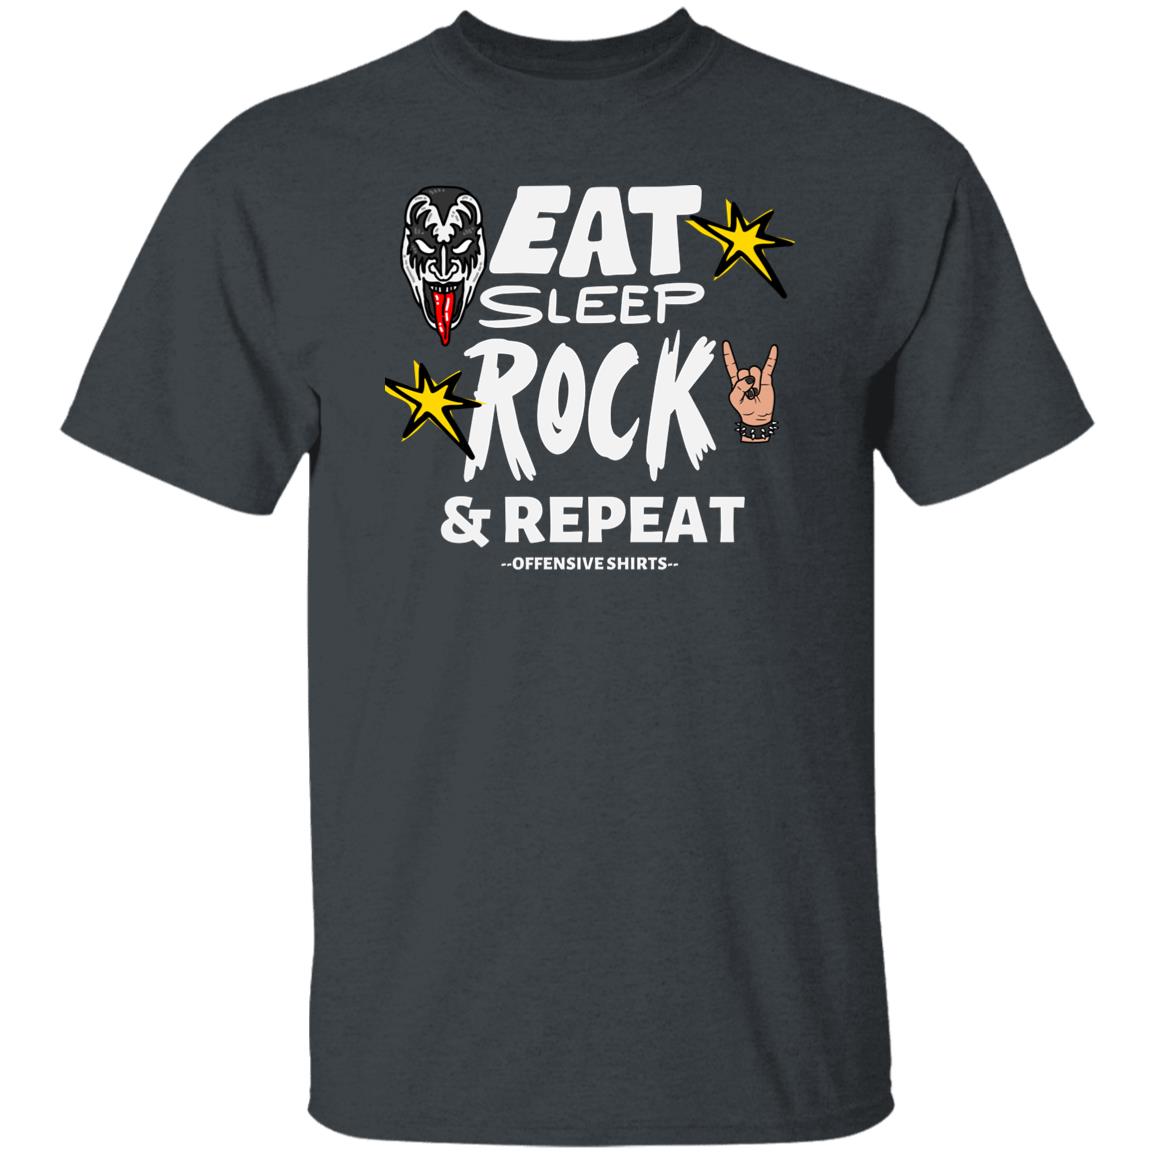 Throwback Classic Rock Heavy Metal Eat Rock Sleep and Repeat T-shirt